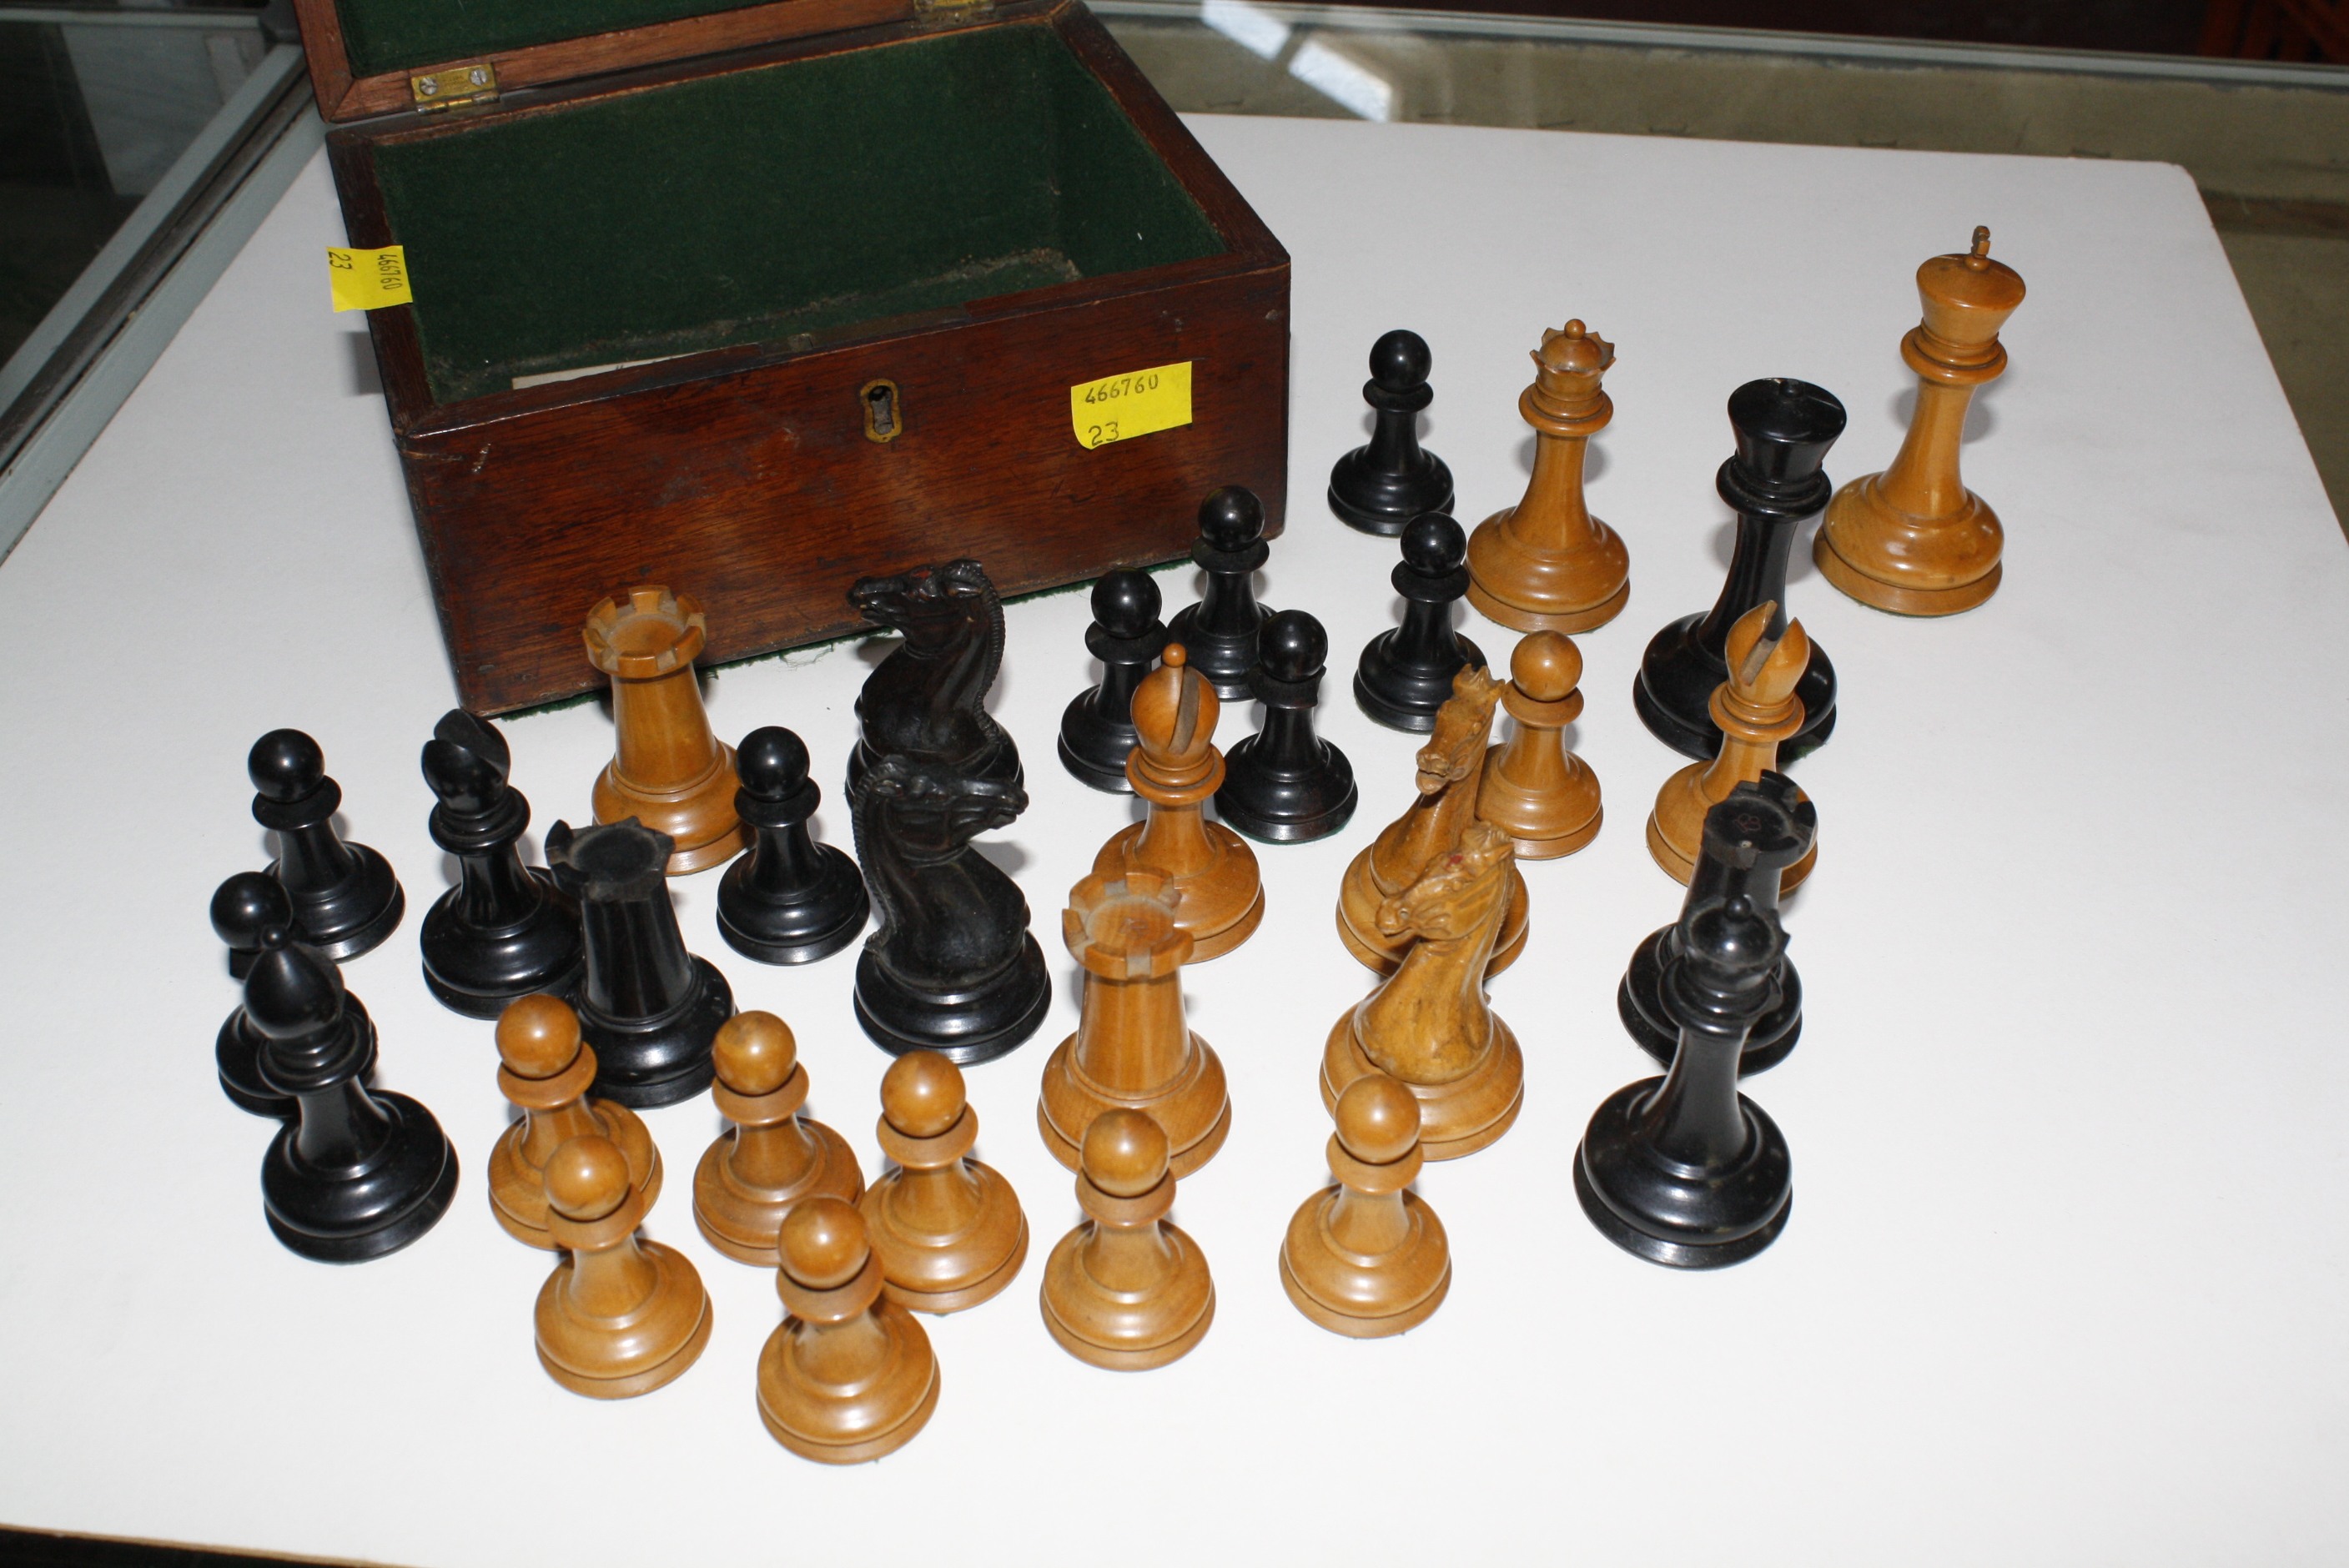 A complete set of Jaques Staunton chess pieces in labelled box (damaged) £30-50 - Image 2 of 2